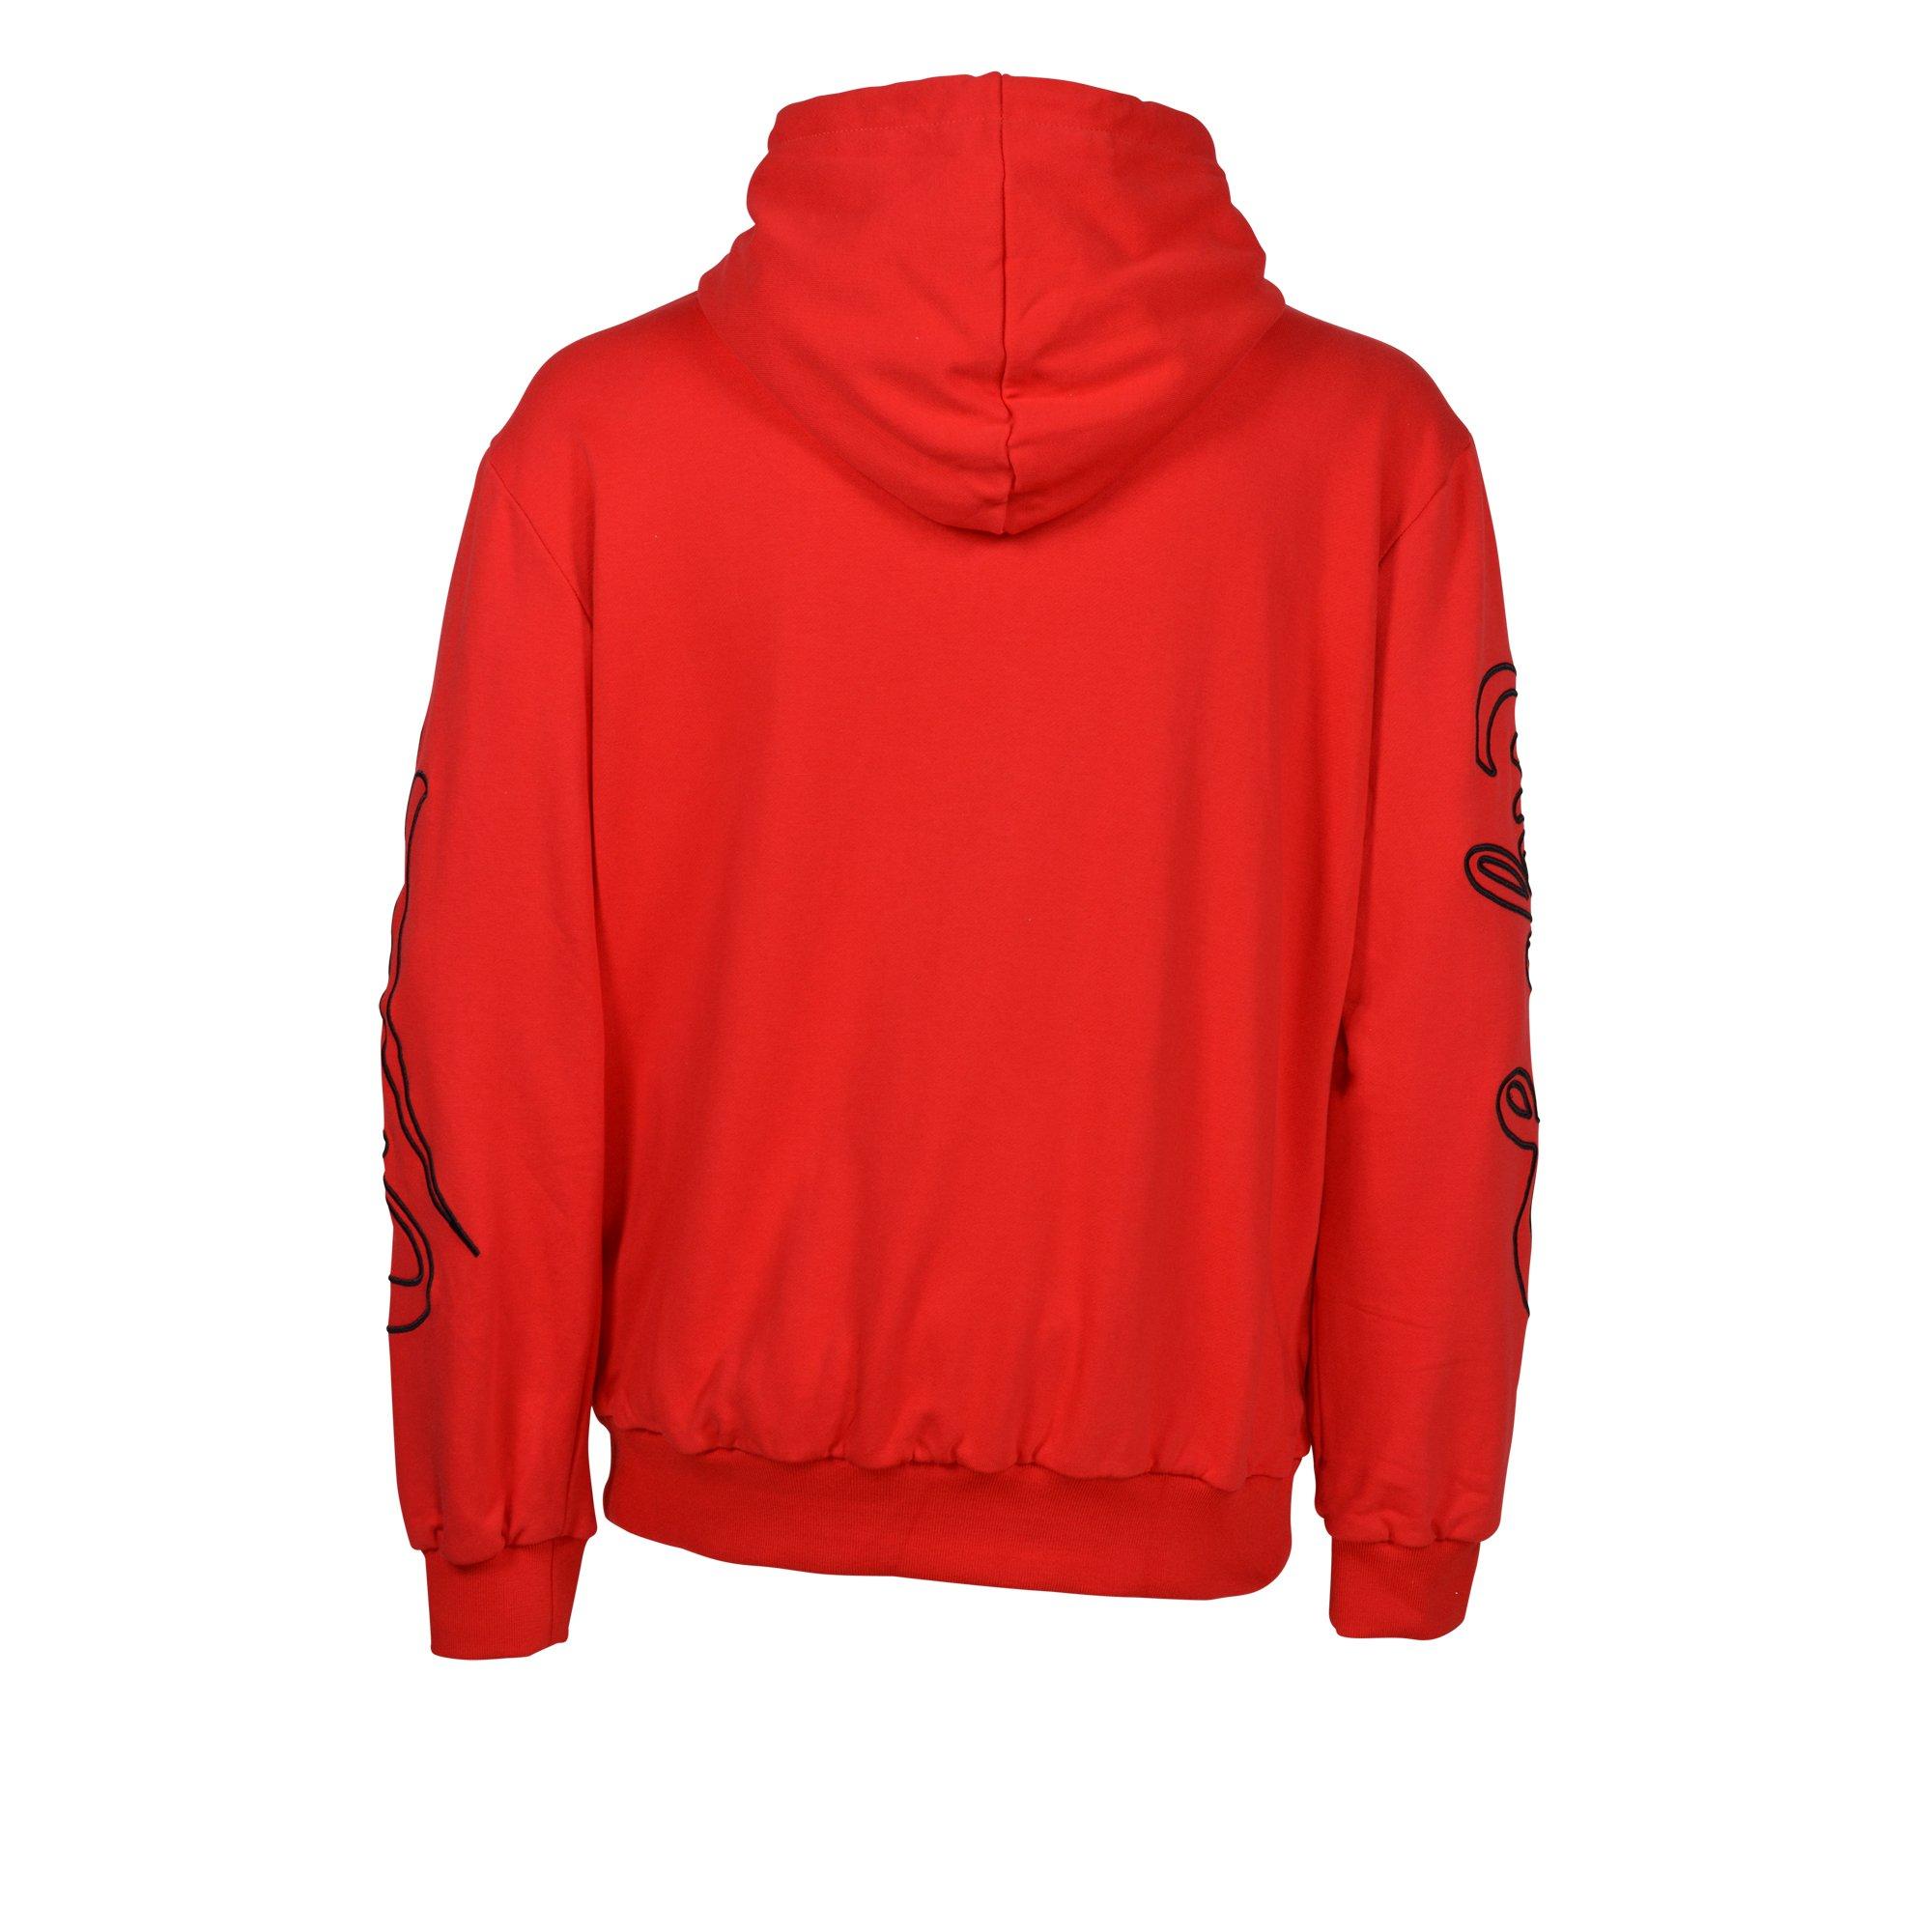 BKYS Men's Lucky Charm Hoodie-Red/Black